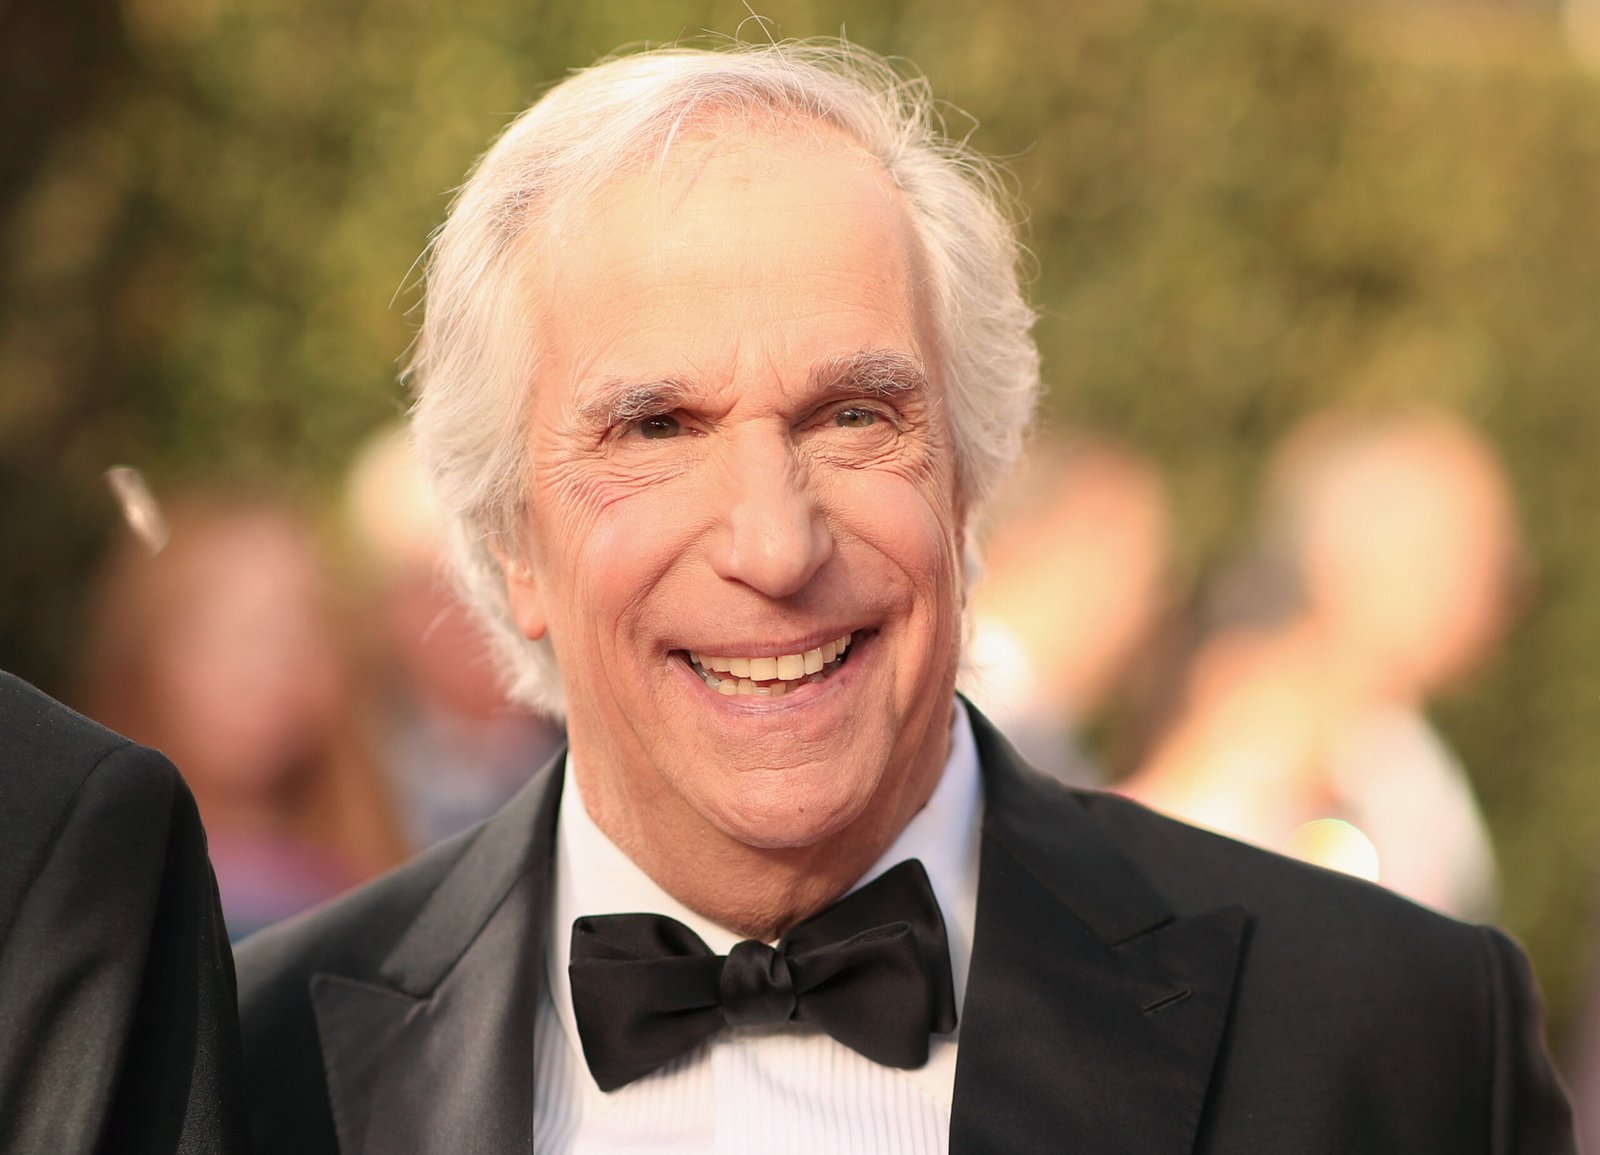 What is Henry Winkler doing these days?